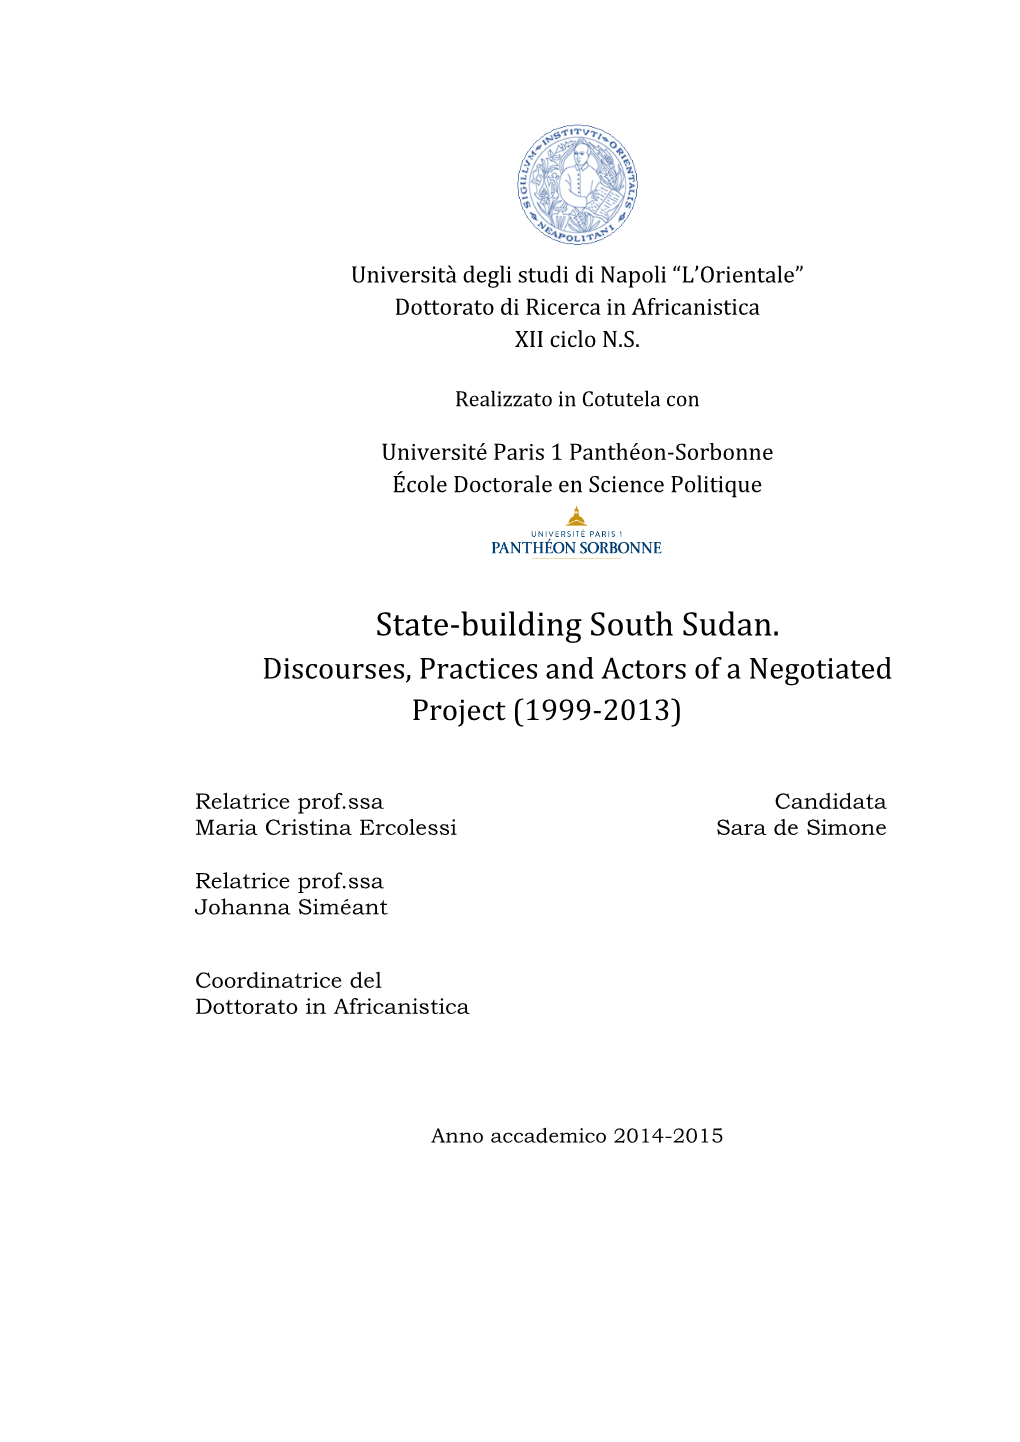 State-Building South Sudan. Discourses, Practices and Actors of a Negotiated Project (1999-2013)